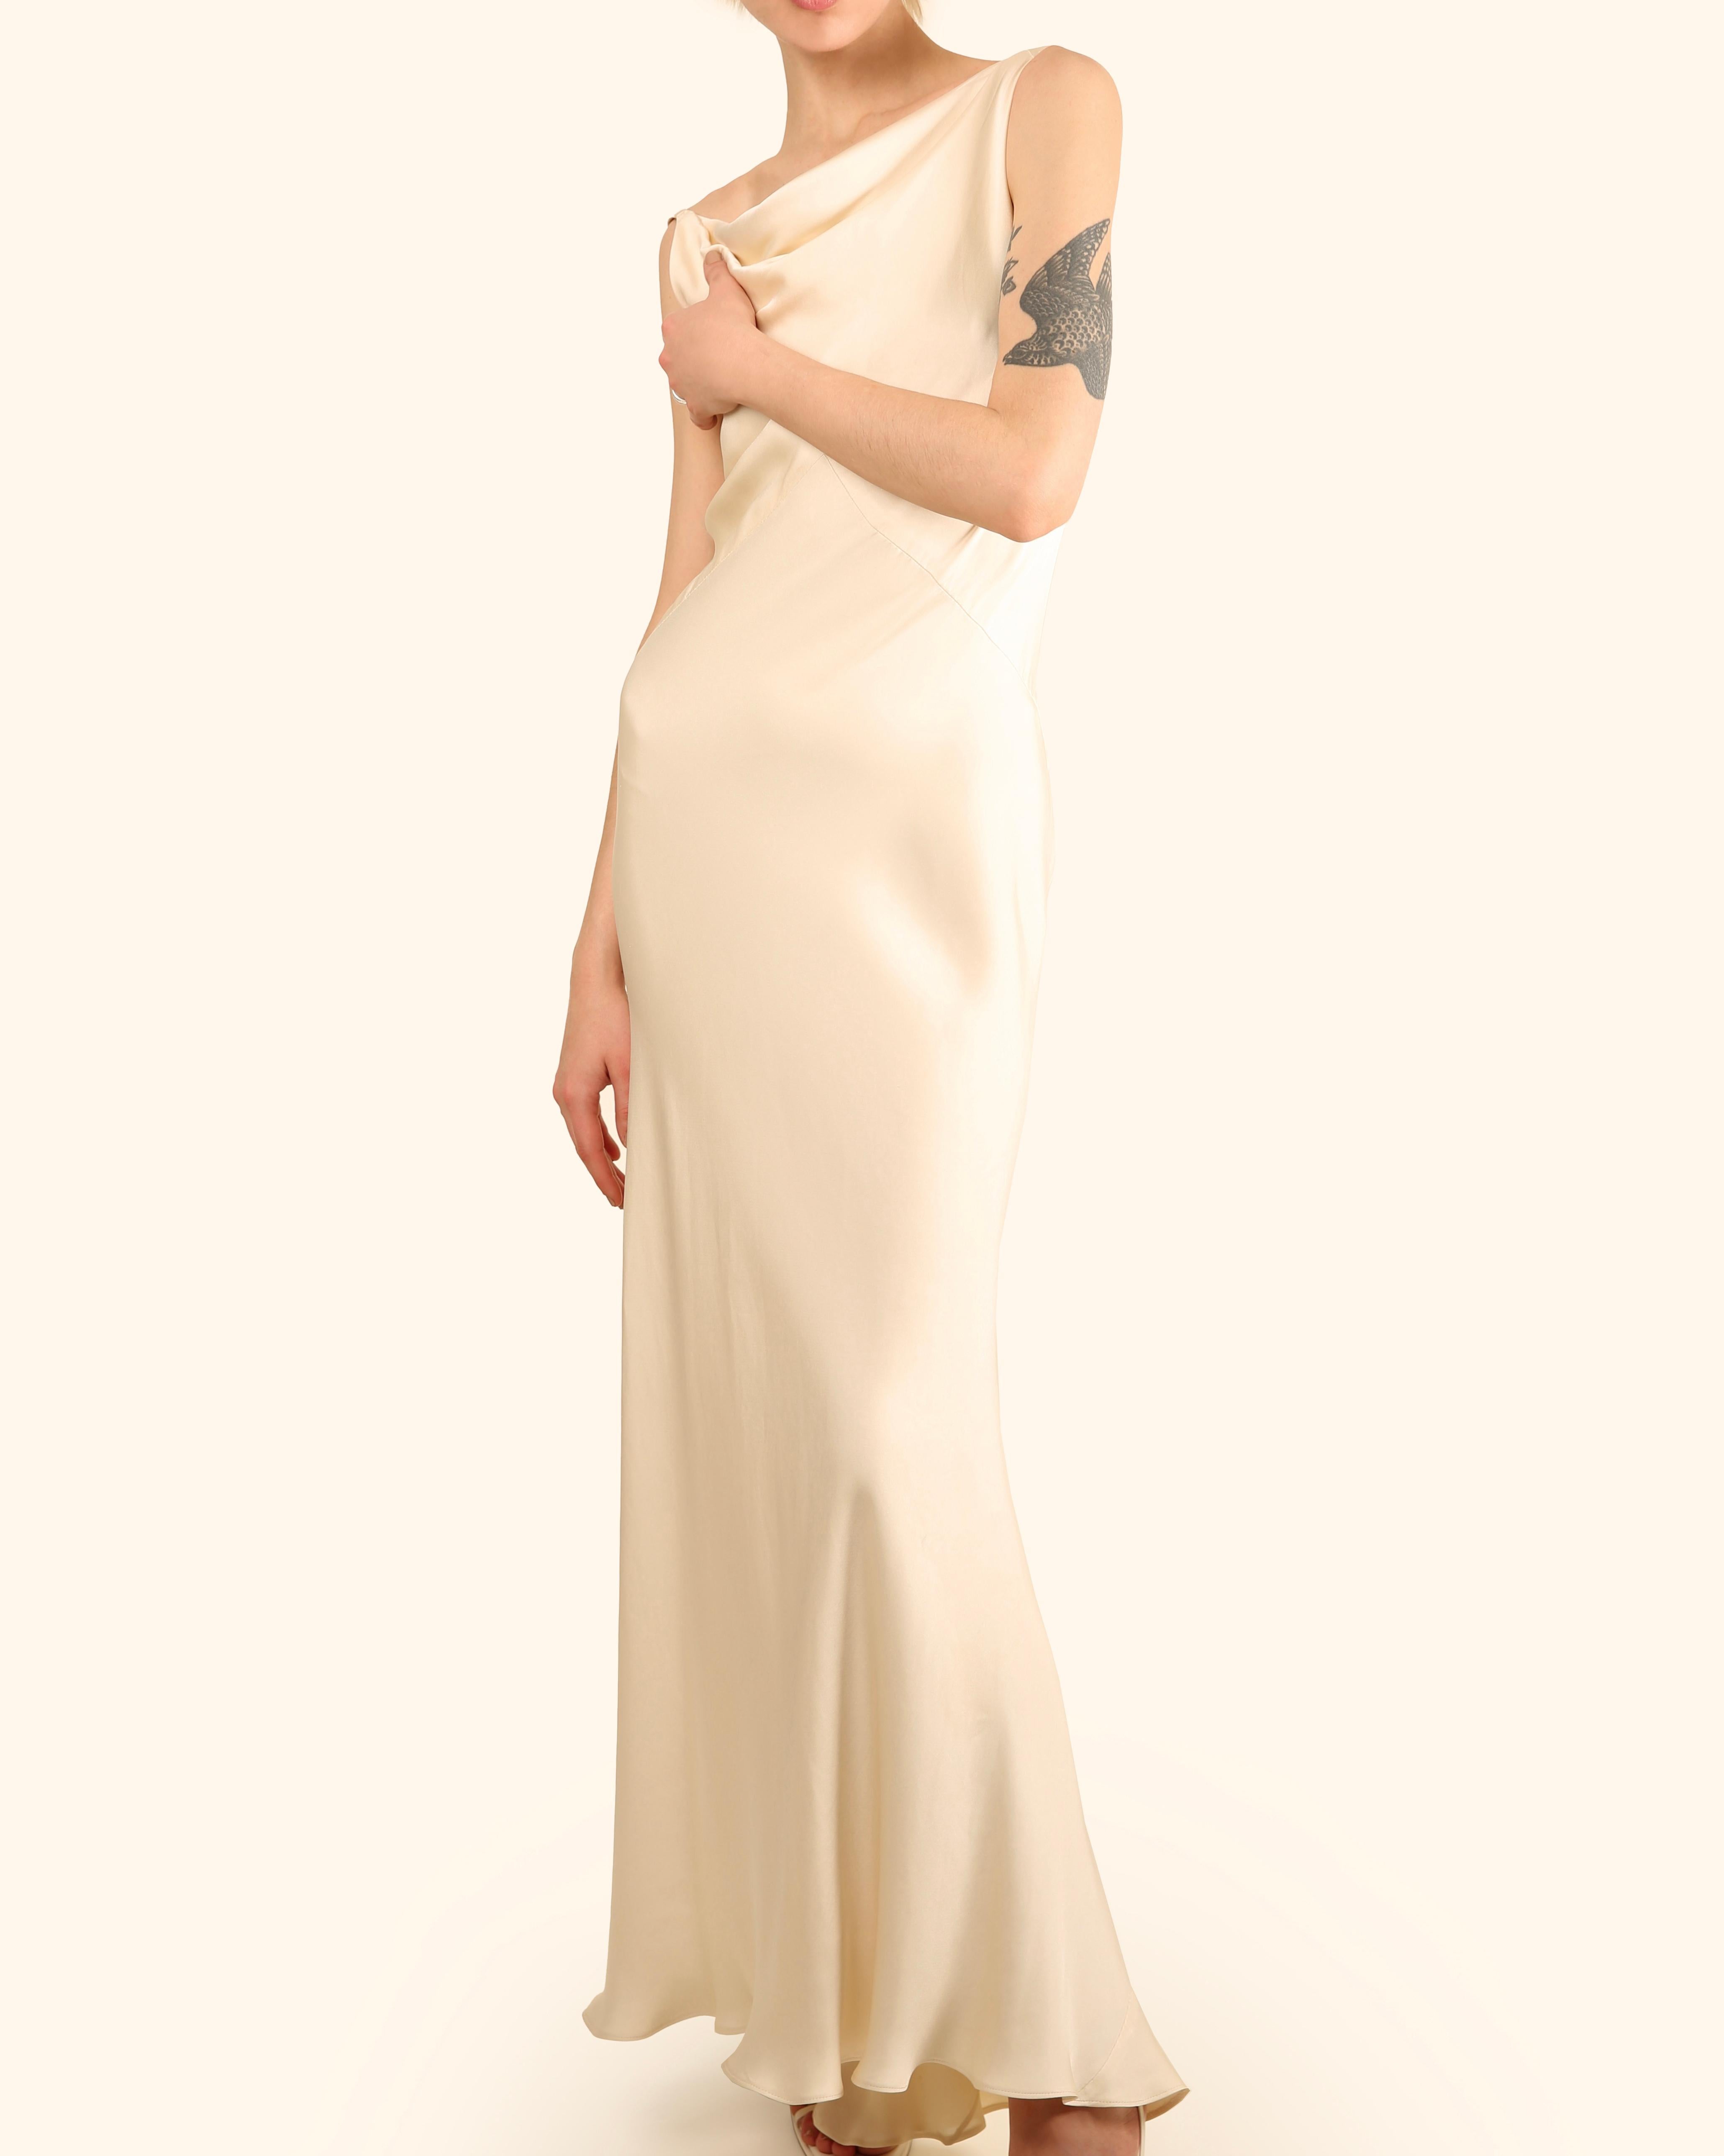 Ralph Lauren champagne bias cut backless silk slip style backless gown dress For Sale 6